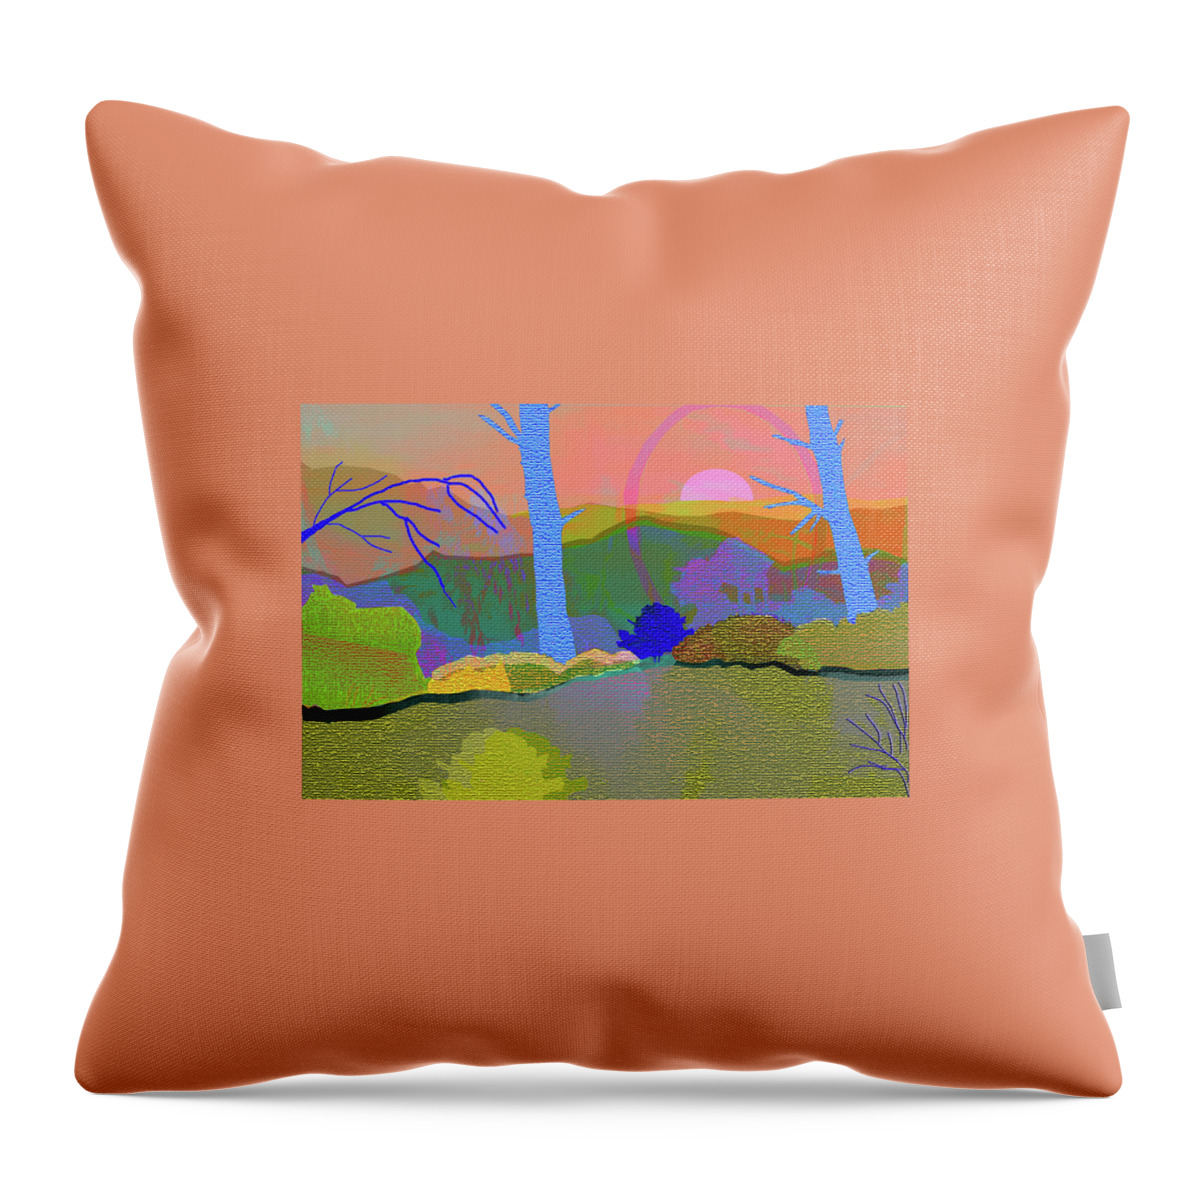 Digital Throw Pillow featuring the digital art Morning Sunrise by Rod Whyte